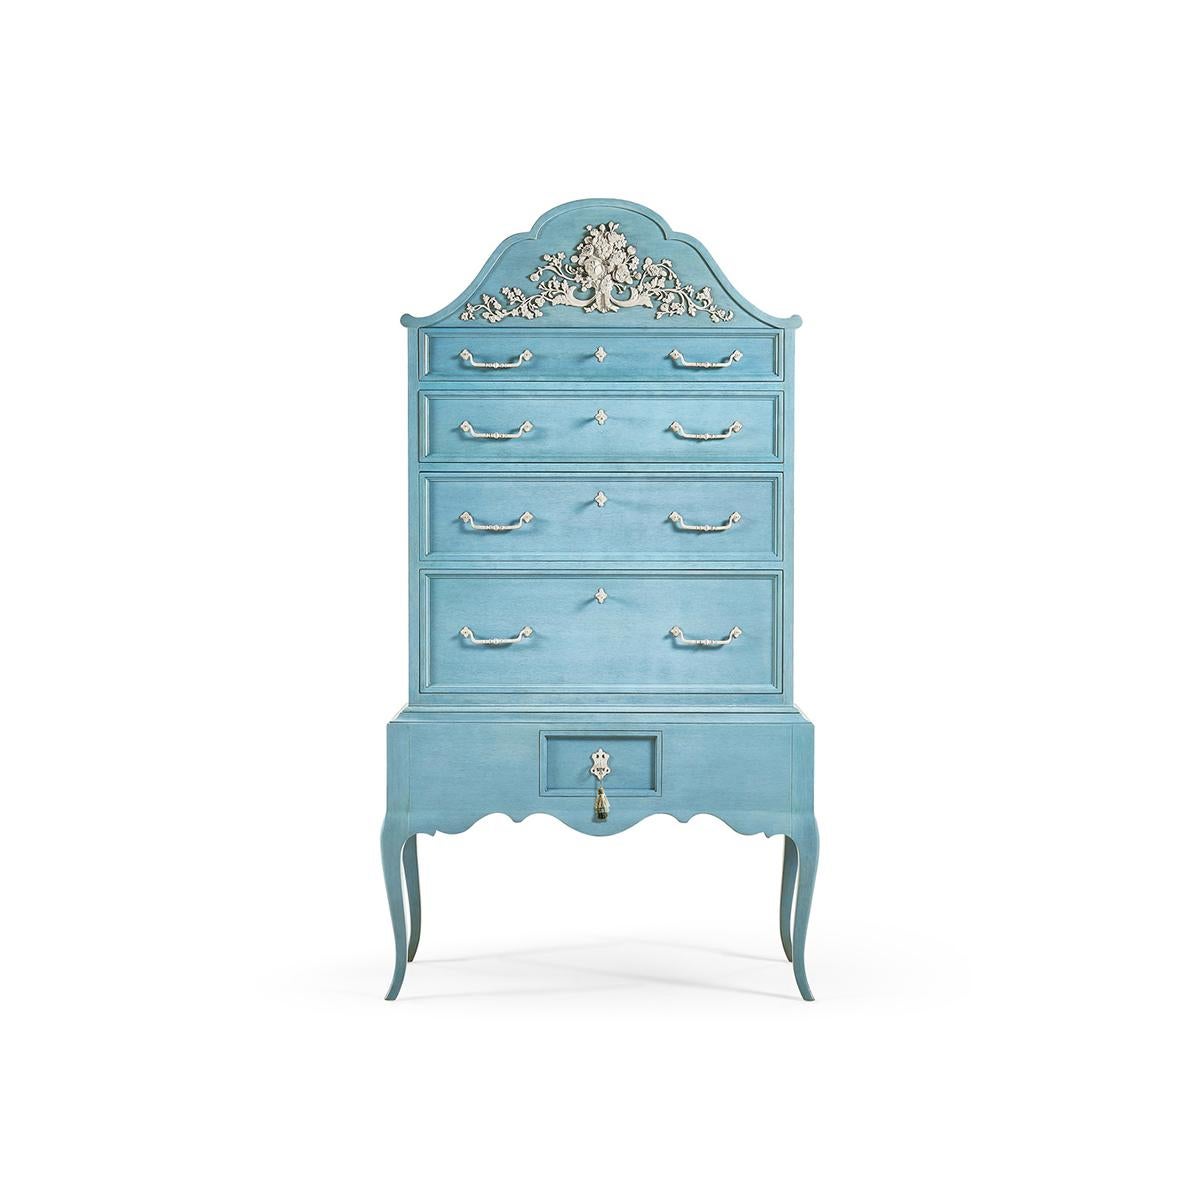 Queen Anne Style painted high boy, a unique chest that boasts a bouquet of carved roses two inches deep in a luxurious Danish blue finish on its pediment. Delicate Queen Anne legs, white painted metal hardware and lockable drawers blend in a rich